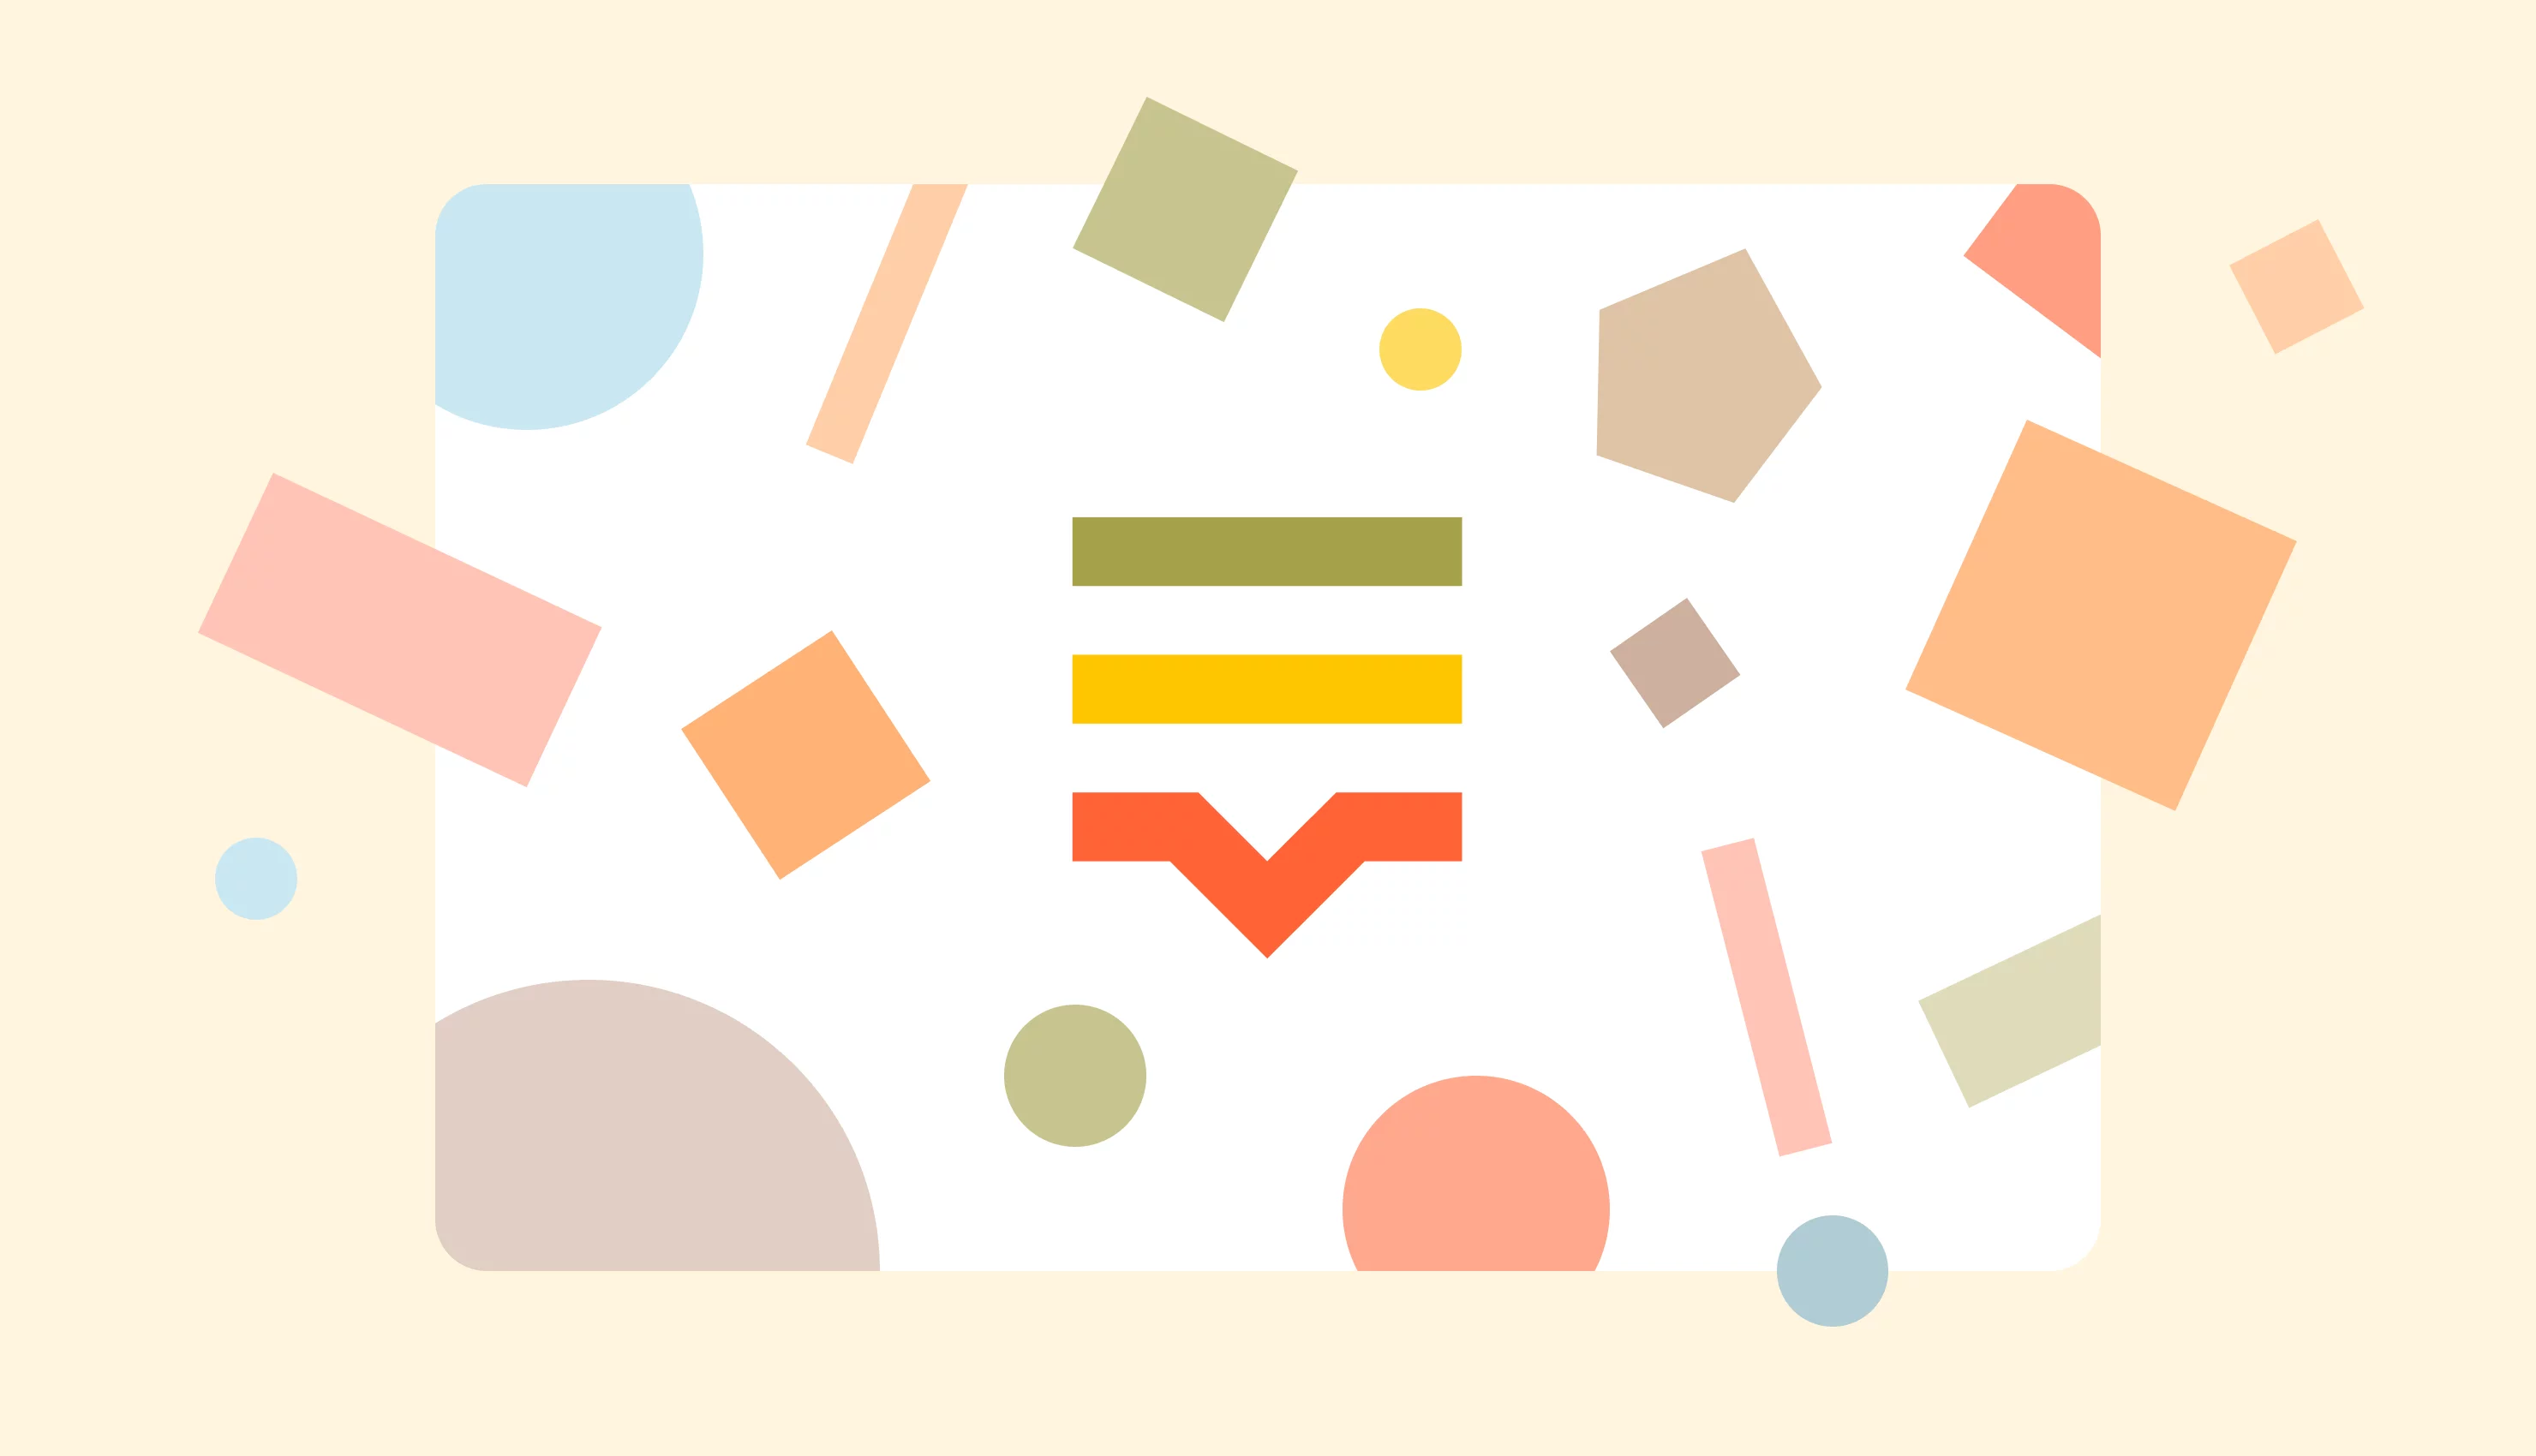 New in May: automatic import & export, TM search, Lokalise Messages for Zendesk Support, filter updates, and more.